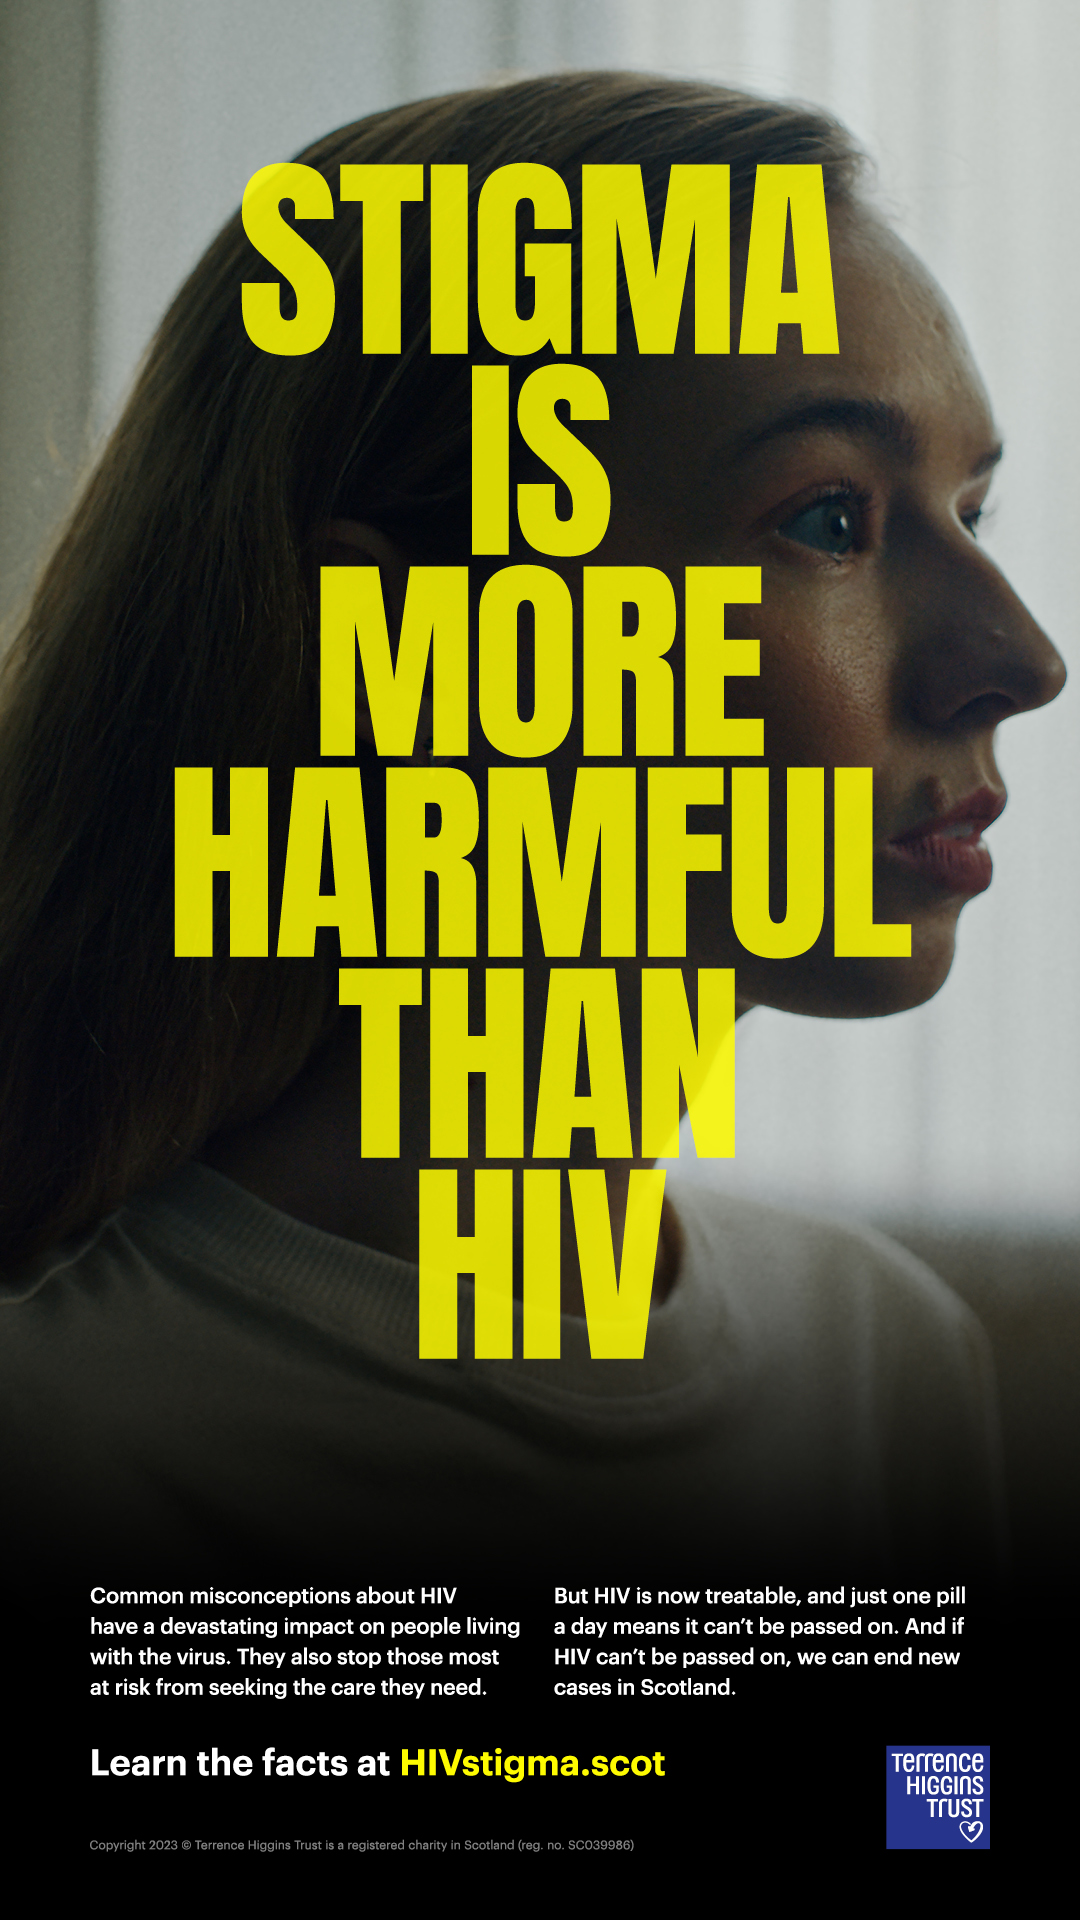 The first major new campaign on HIV in Scotland focusses on stigma.